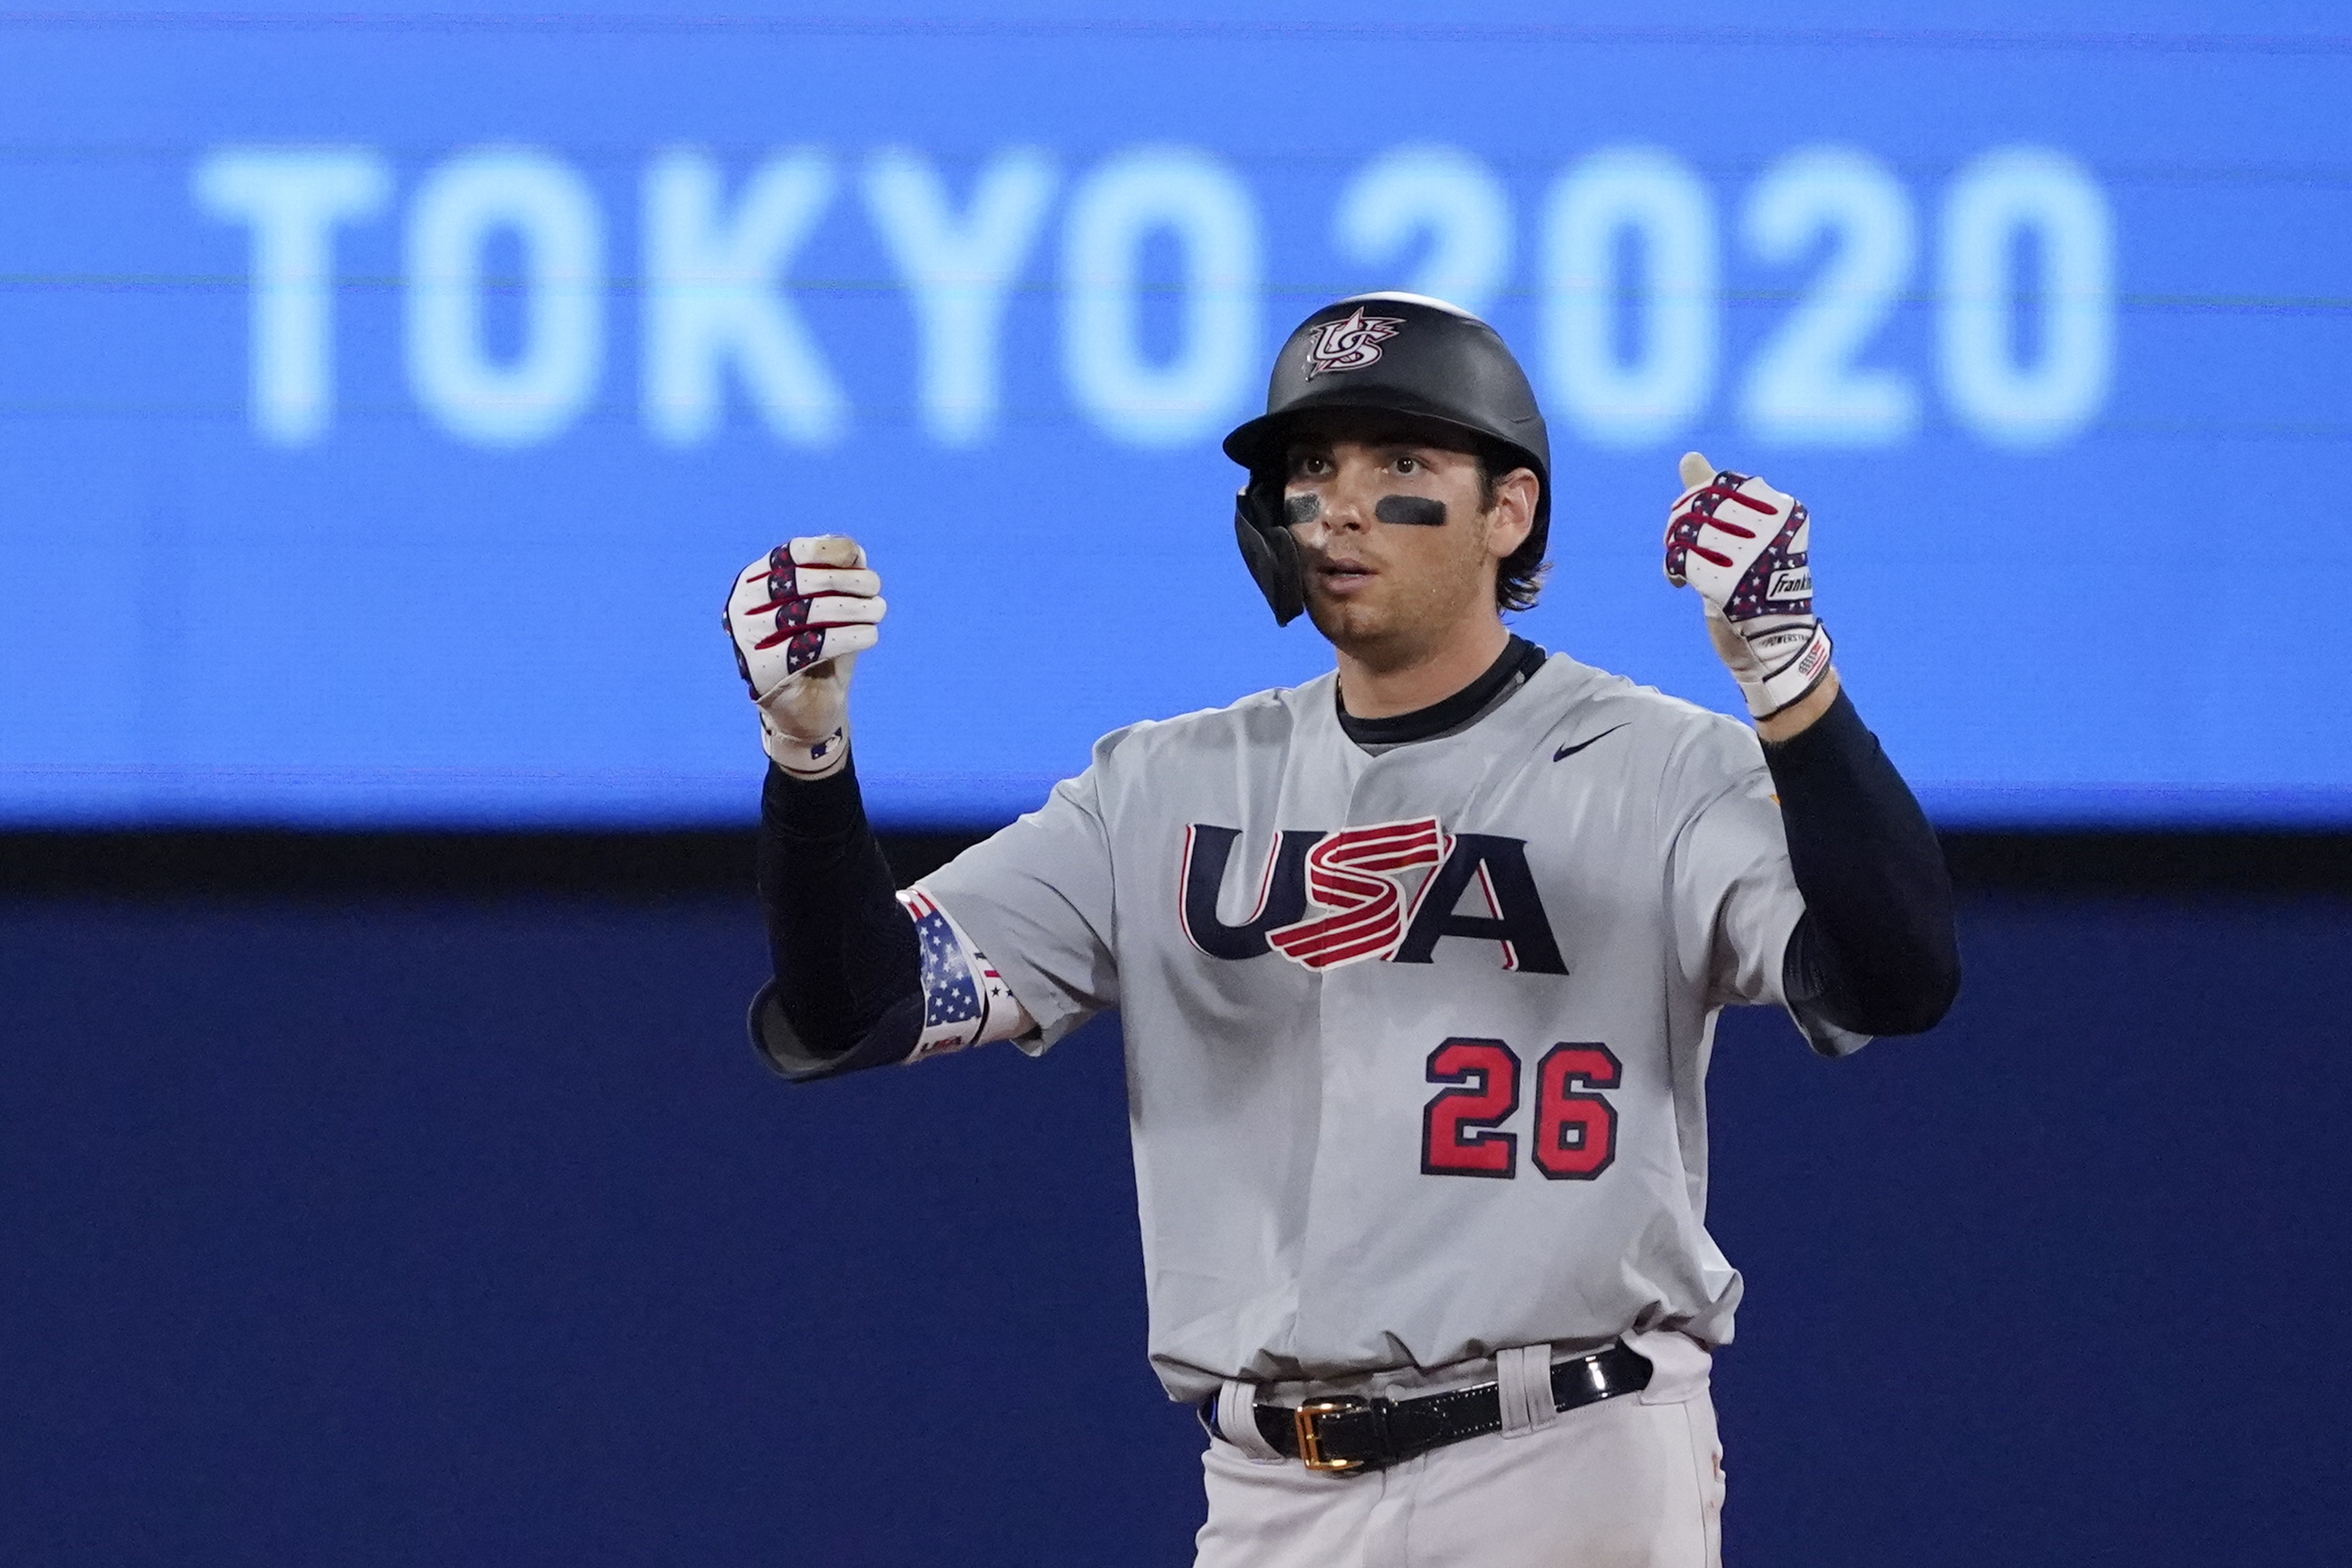 U.S. Olympic baseball team manager Mike Scioscia says roster fluid